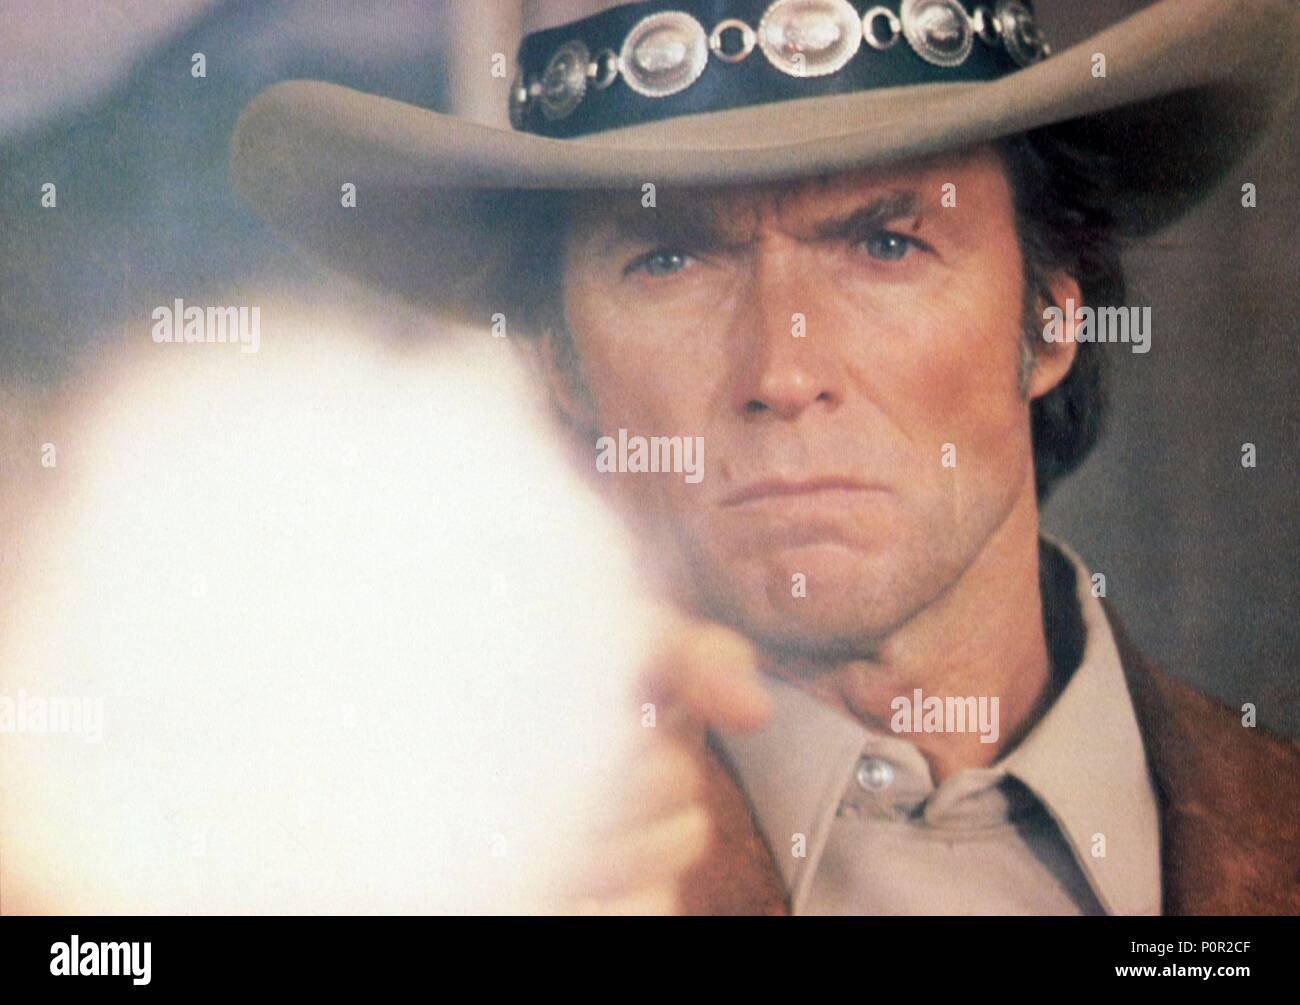 Original Film Title: BRONCO BILLY.  English Title: BRONCO BILLY.  Film Director: CLINT EASTWOOD.  Year: 1980.  Stars: CLINT EASTWOOD. Credit: WARNER BROTHERS / Album Stock Photo